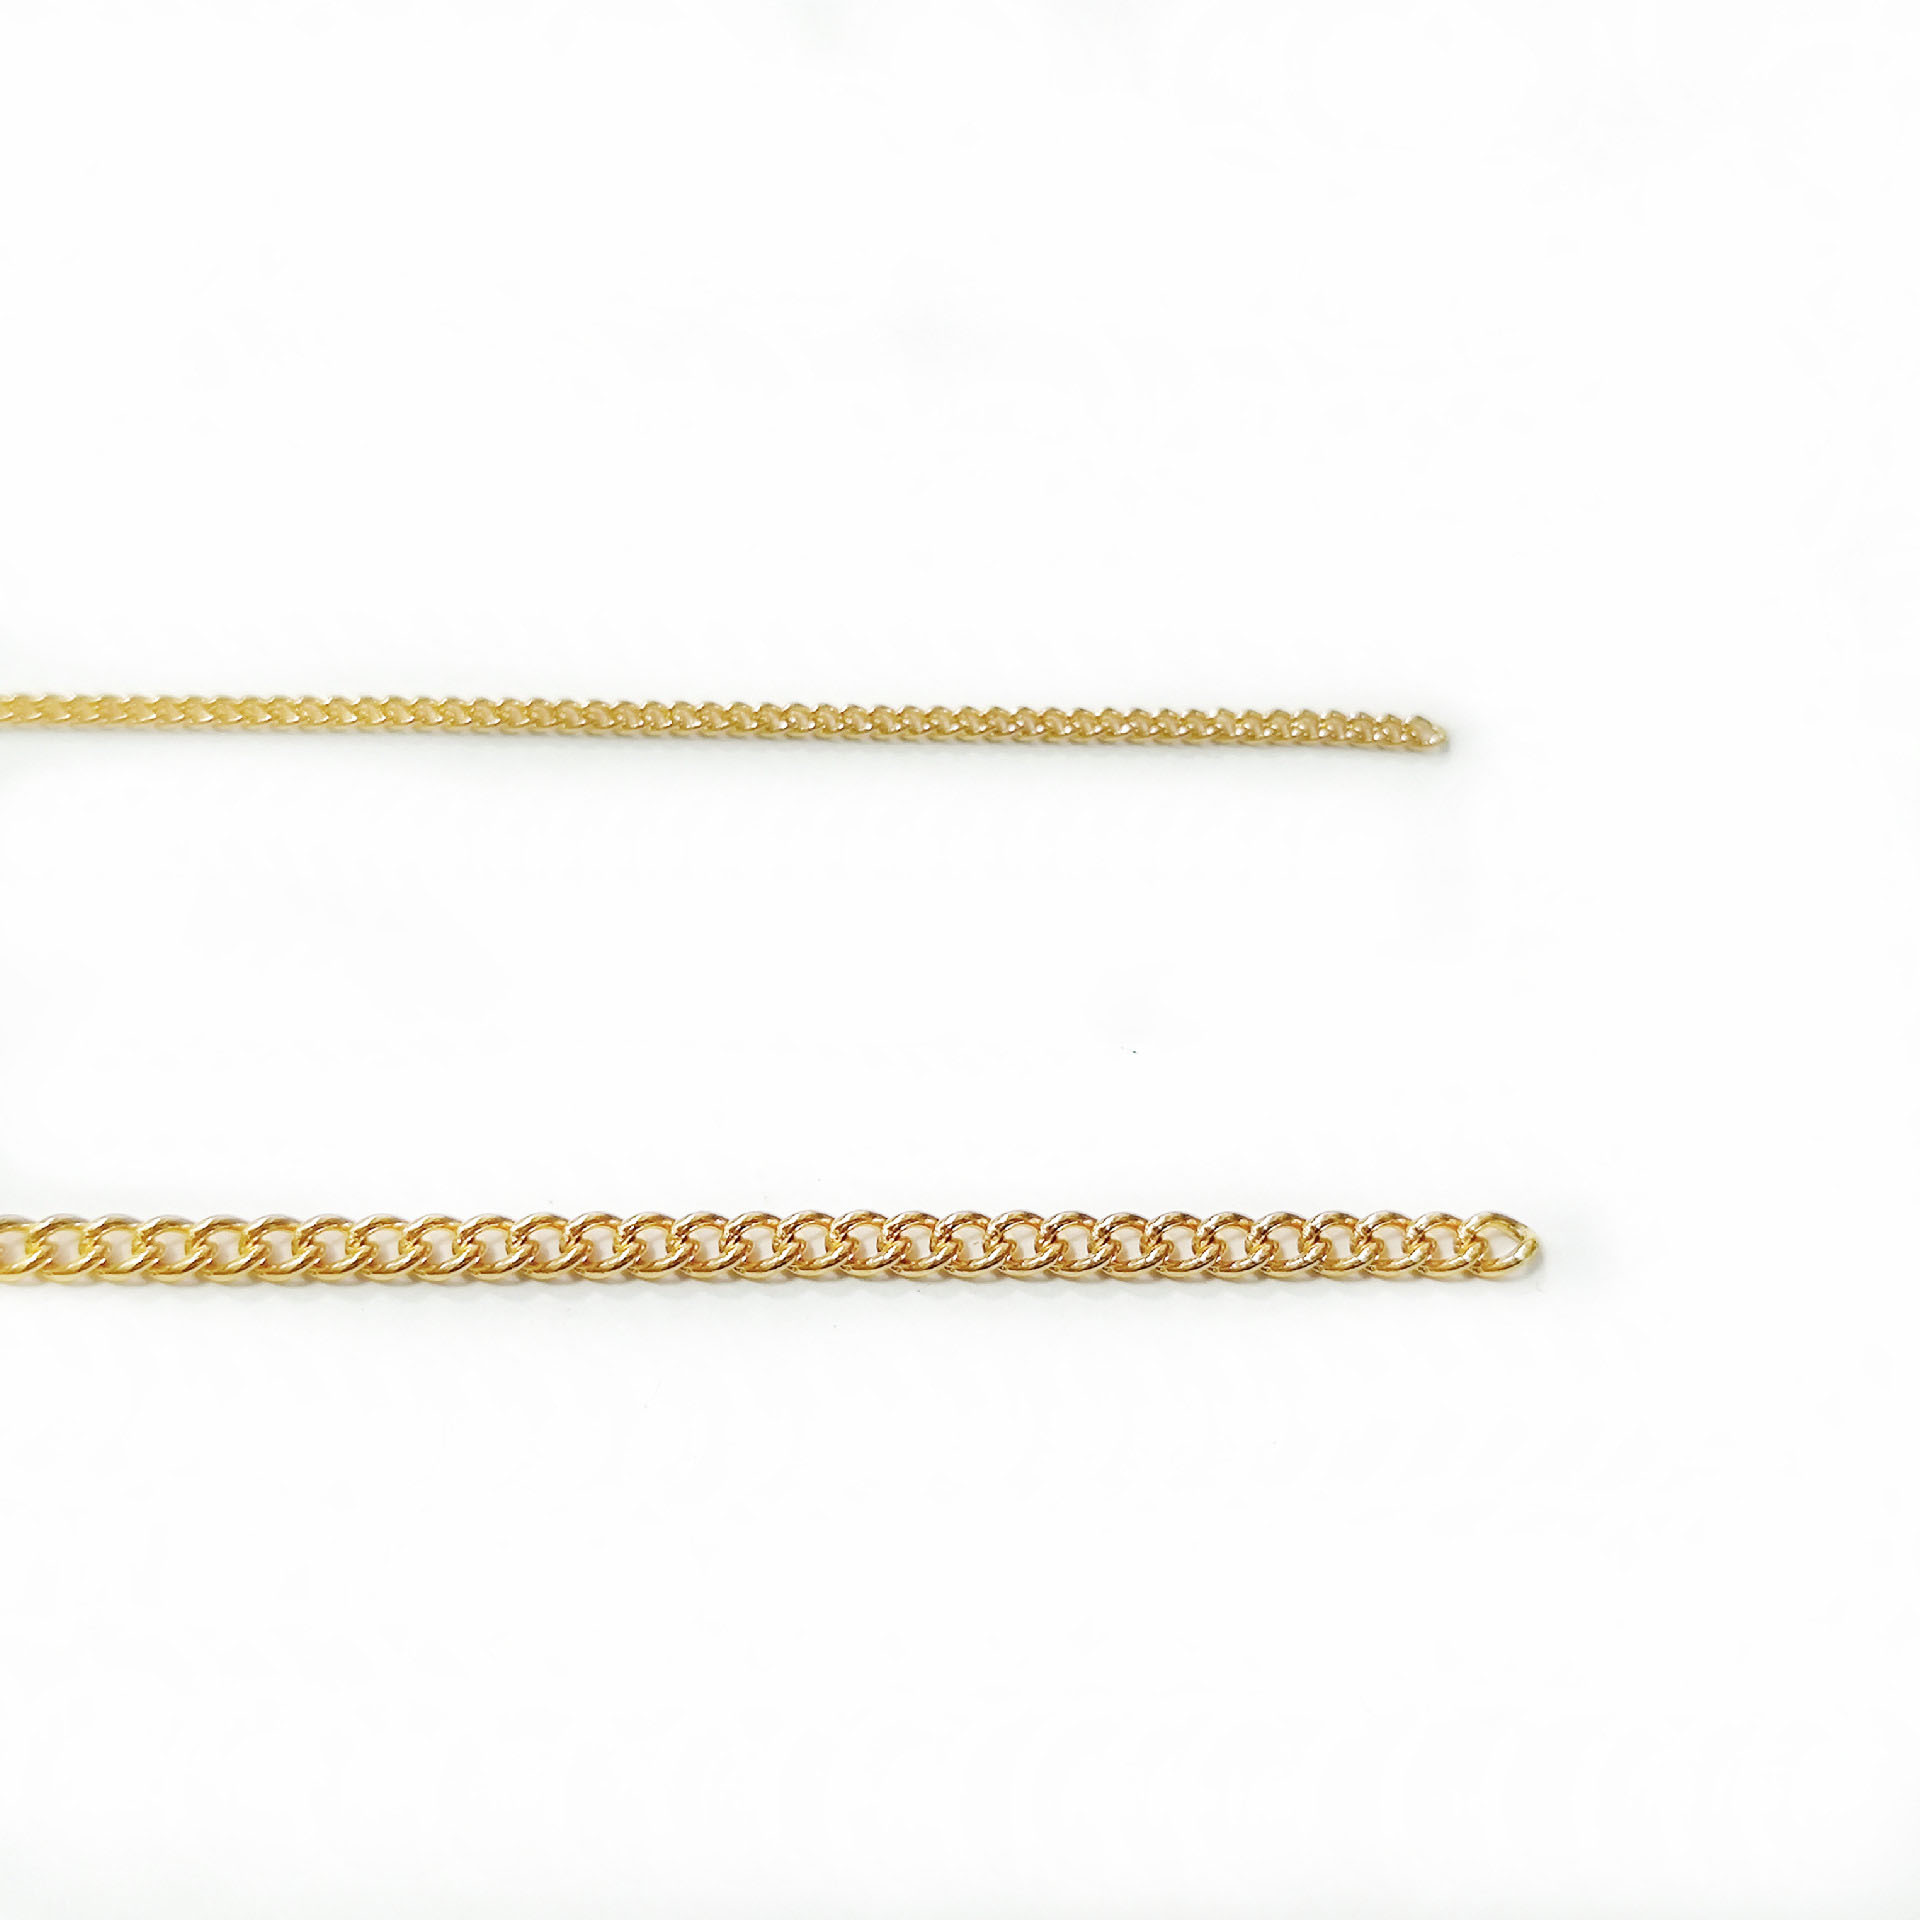 0.6 line*chain width 2.4mm gold